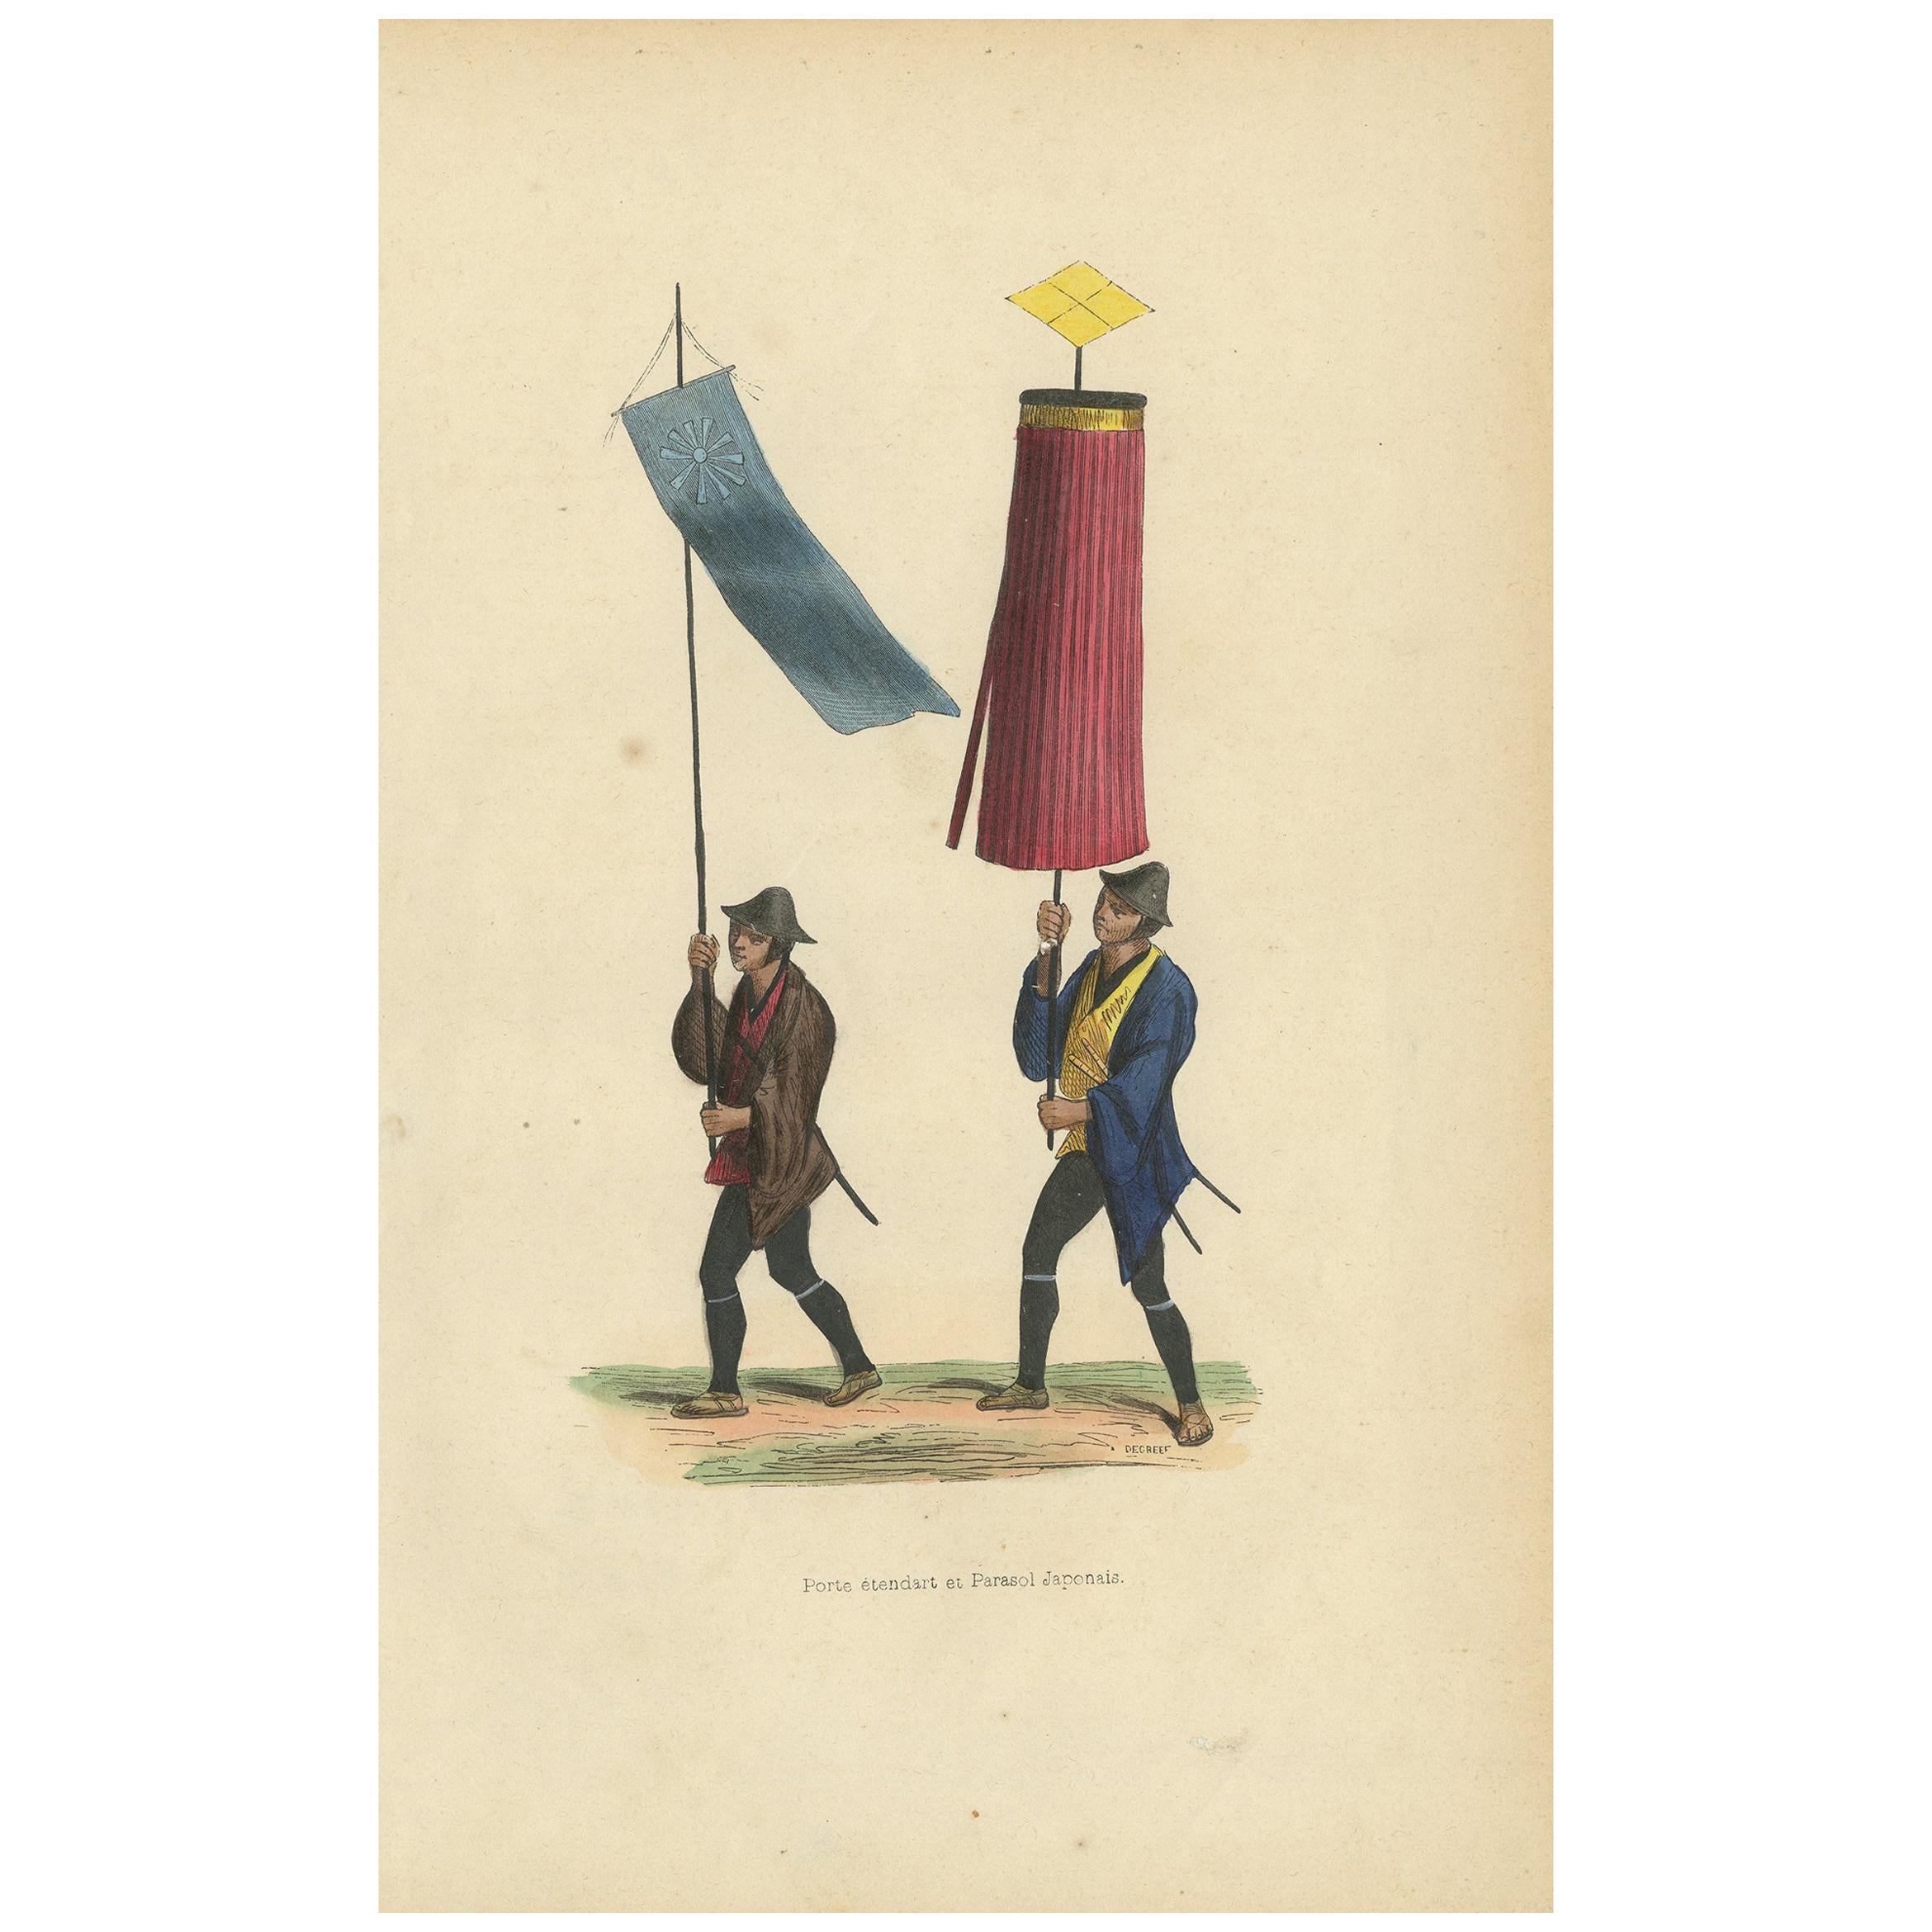 Antique Print of a Japanese Flag and Parasol by Wahlen, 1843